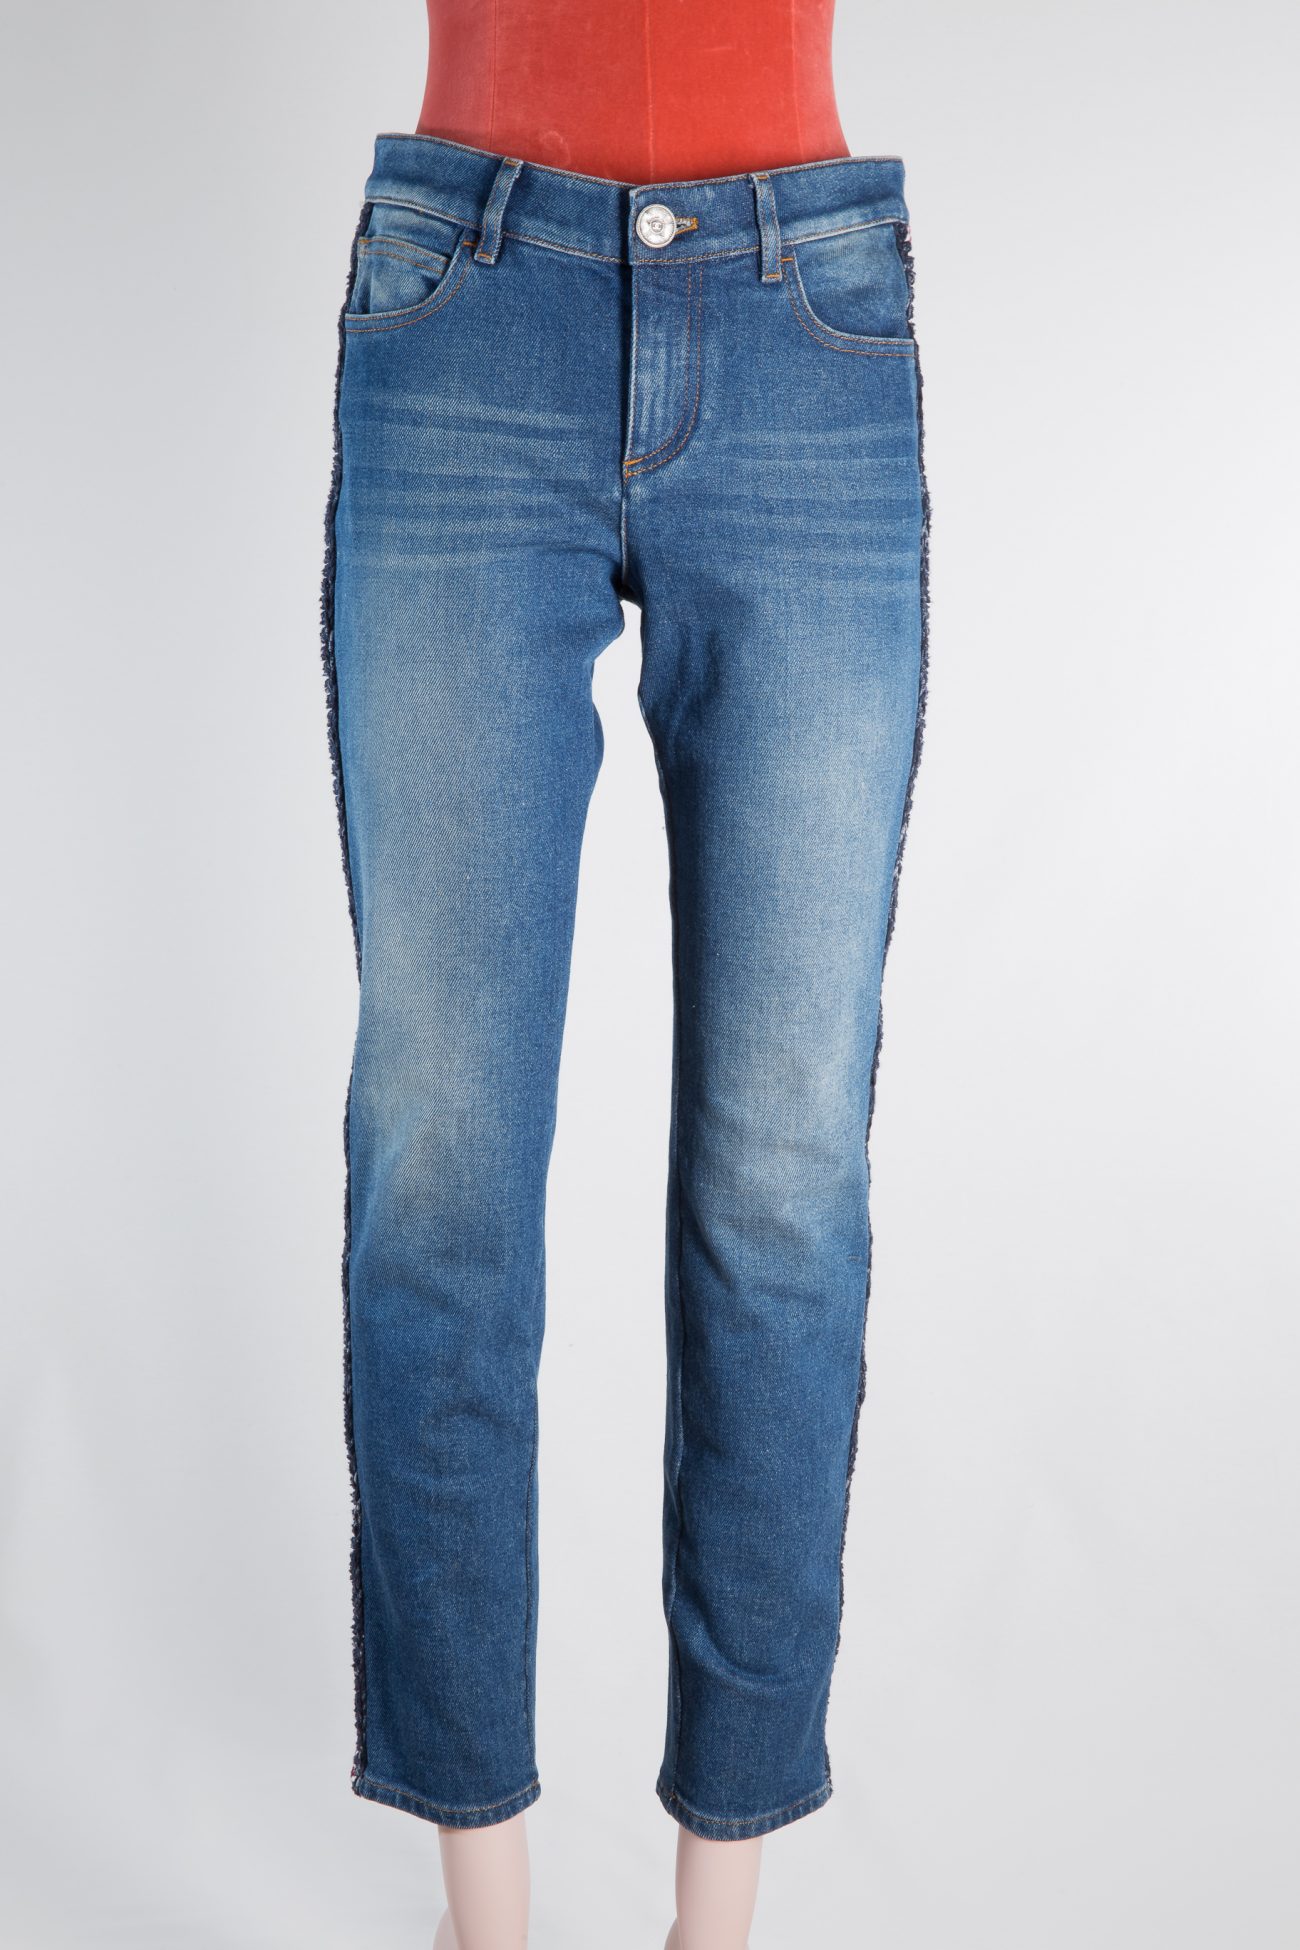 Chanel Jeans, FR36 - Huntessa Luxury Online Consignment Boutique